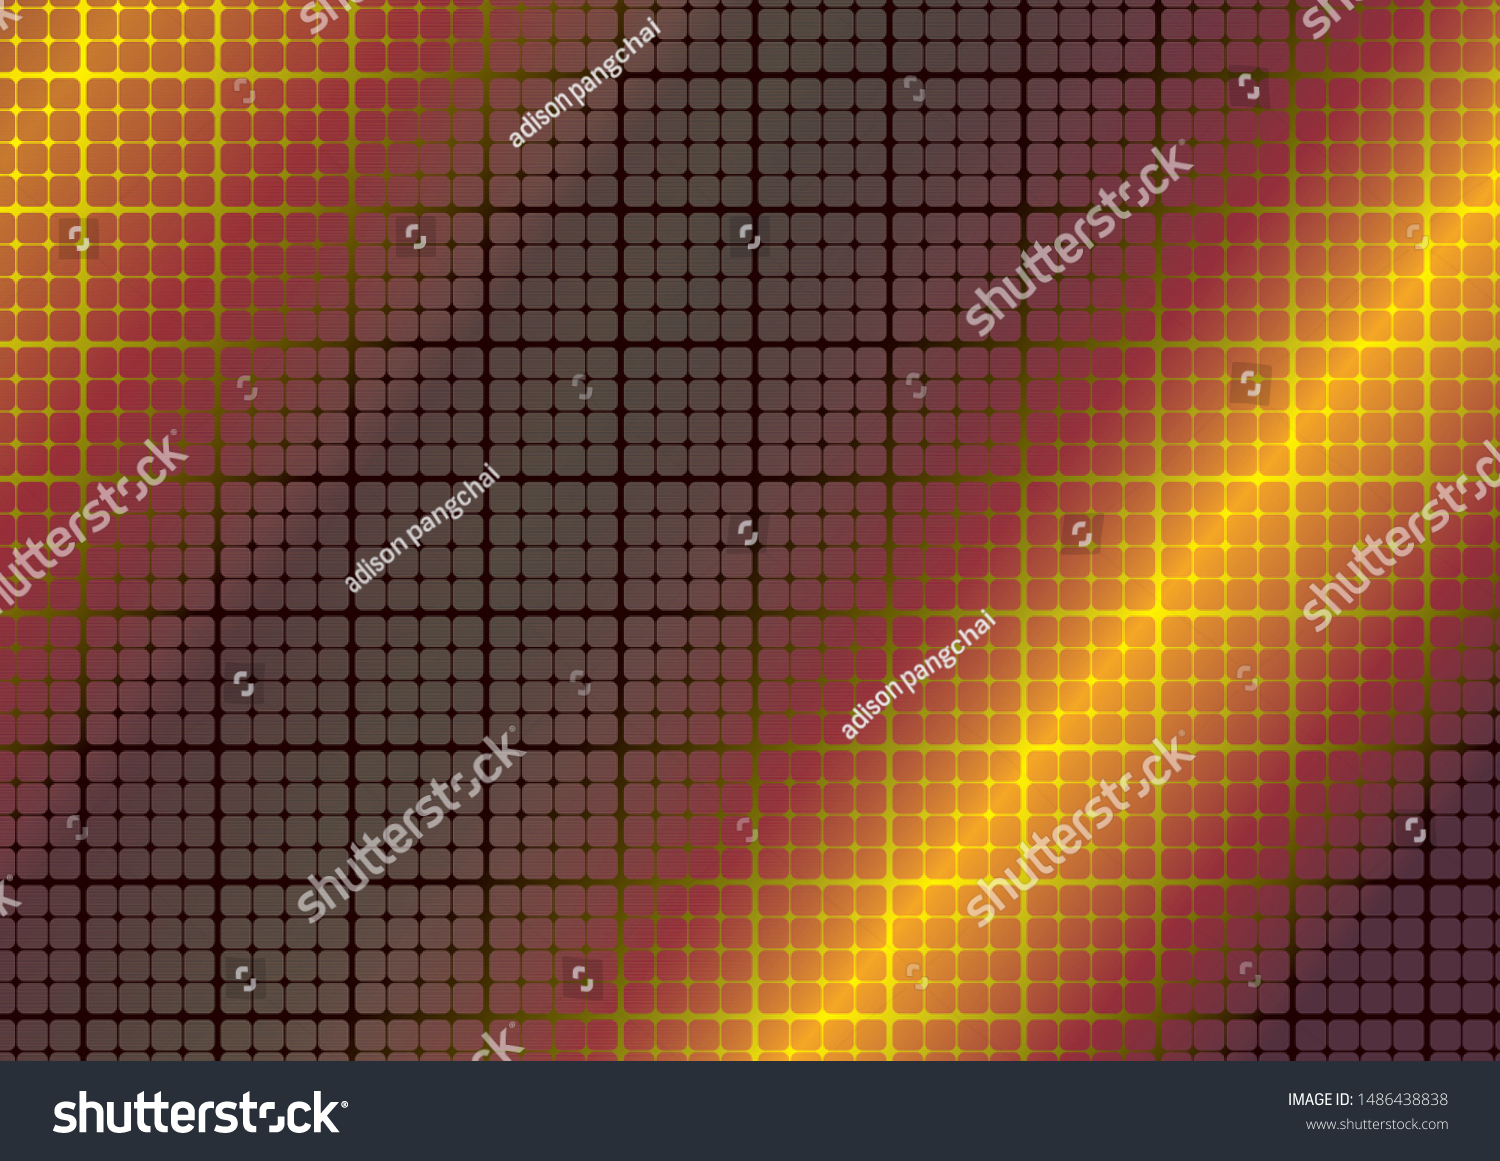 SVG of silicon wafer background.close-up of Silicon wafer svg